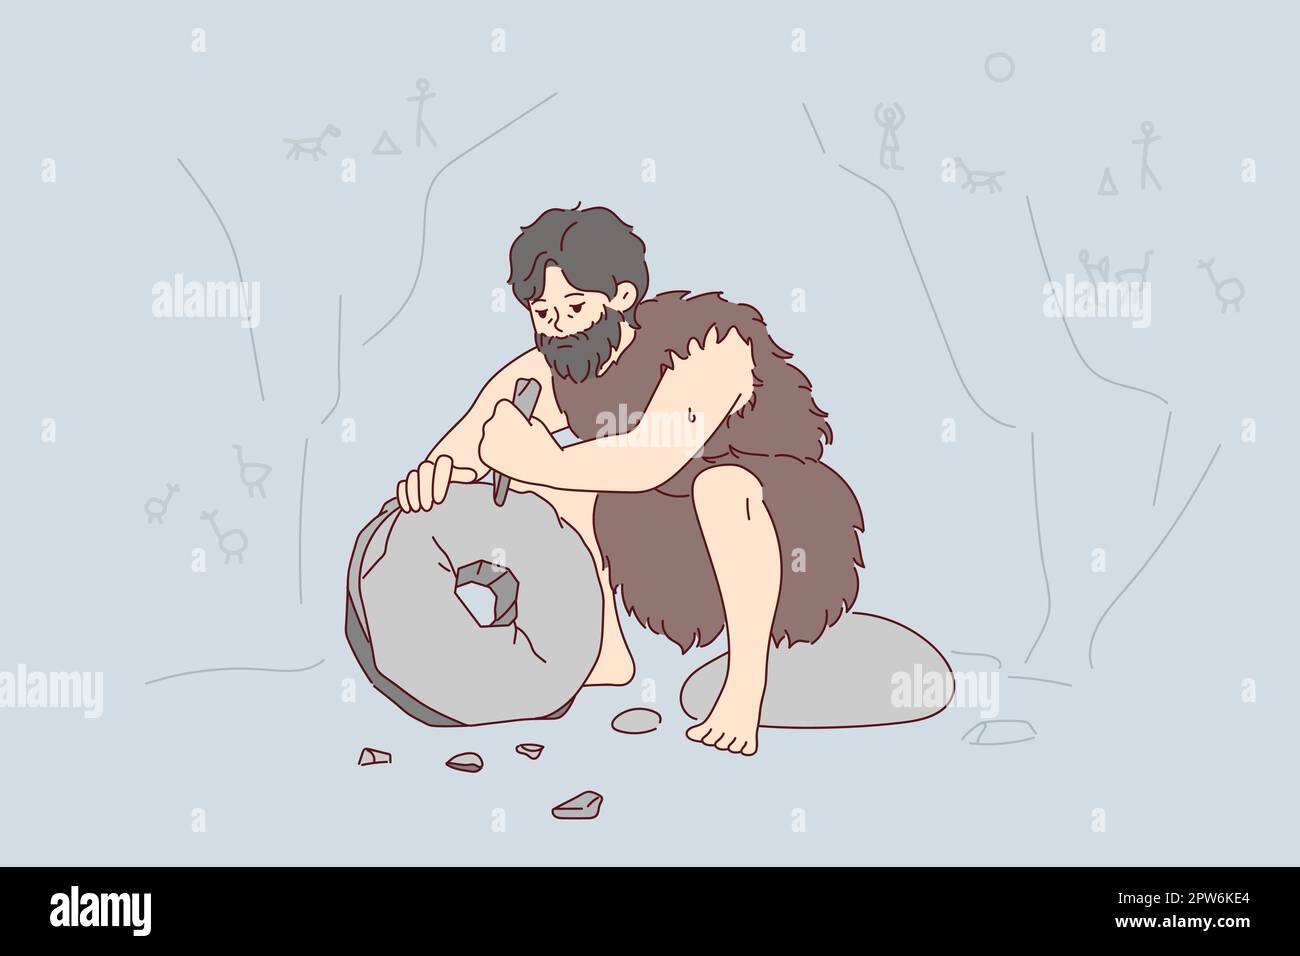 Ancient man with beard who lives in cave uses stone tool to create wheel. Vector image Stock Vector